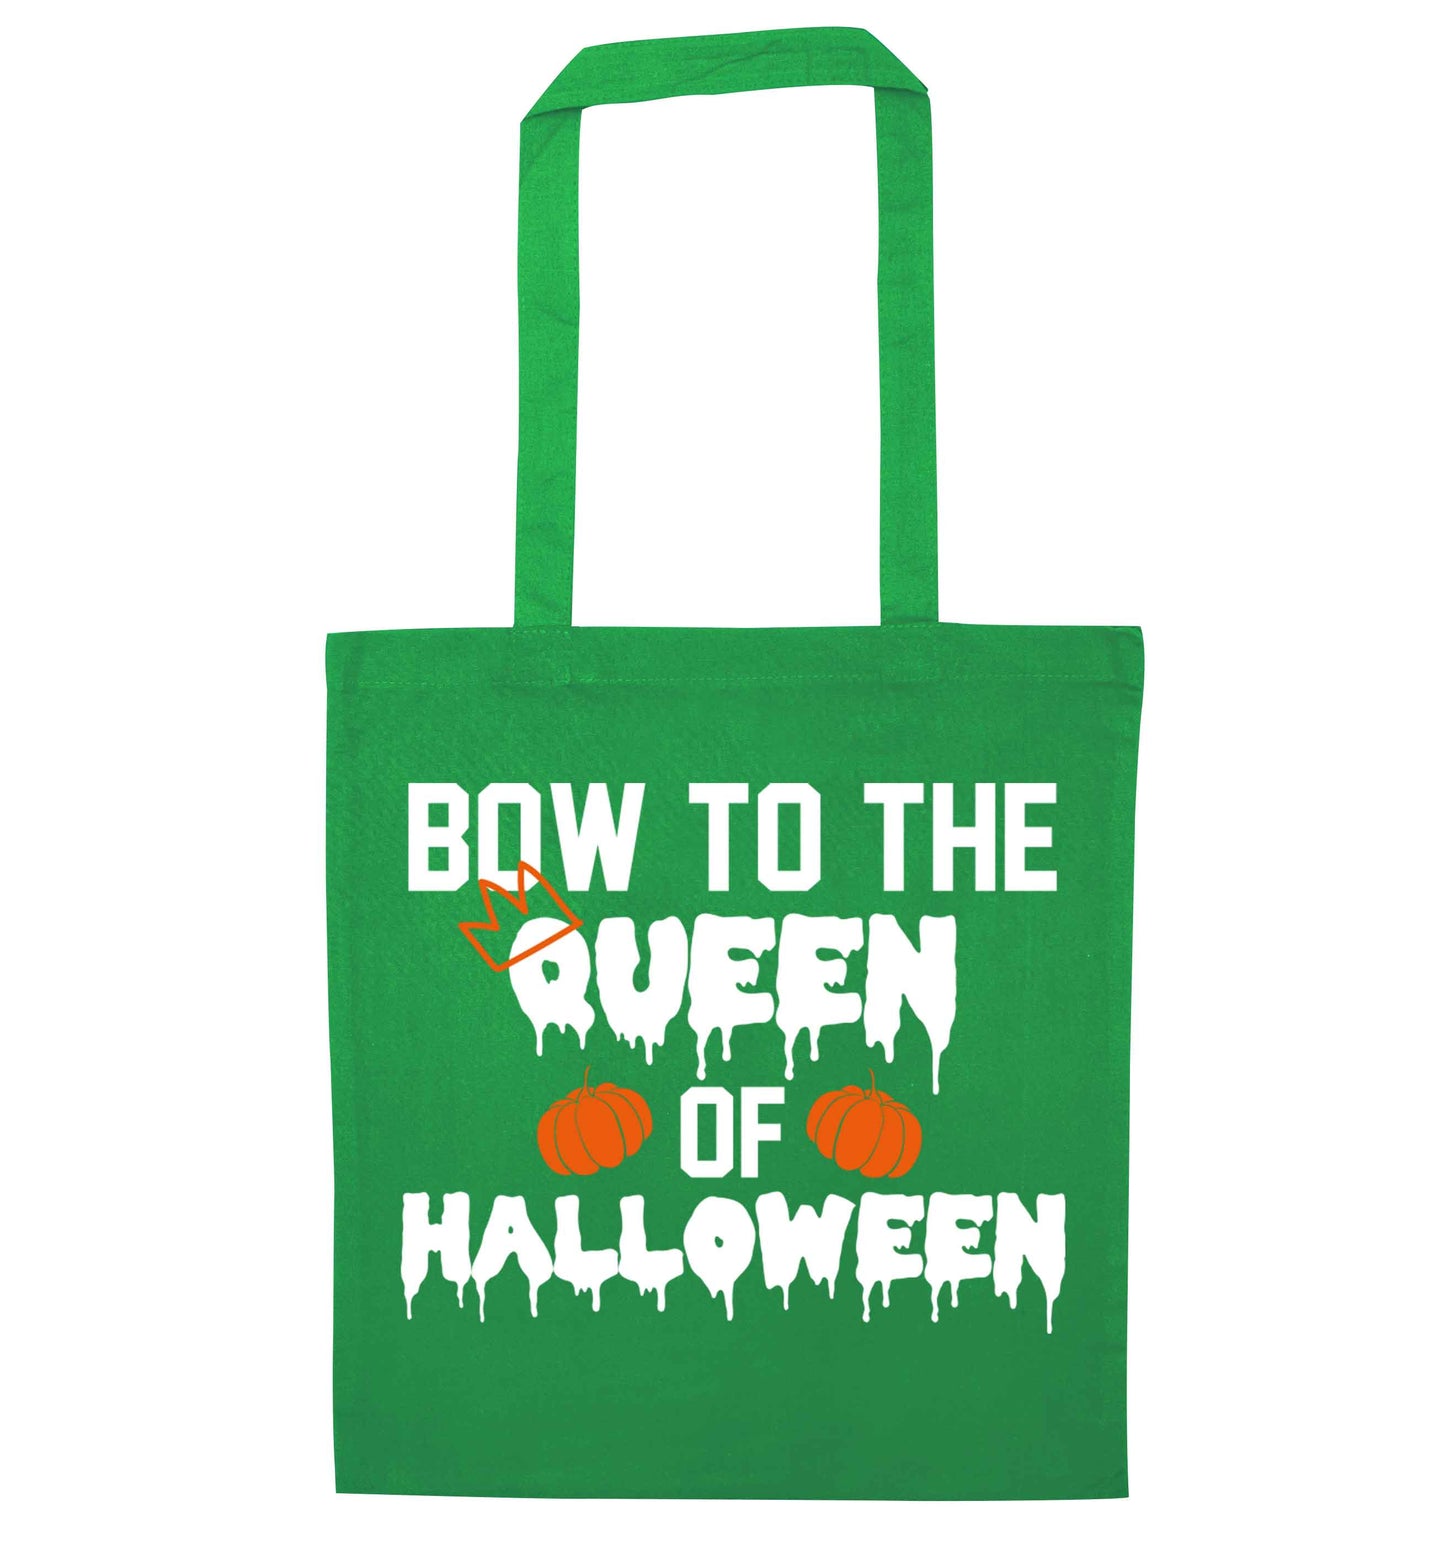 Bow to the Queen of halloween green tote bag